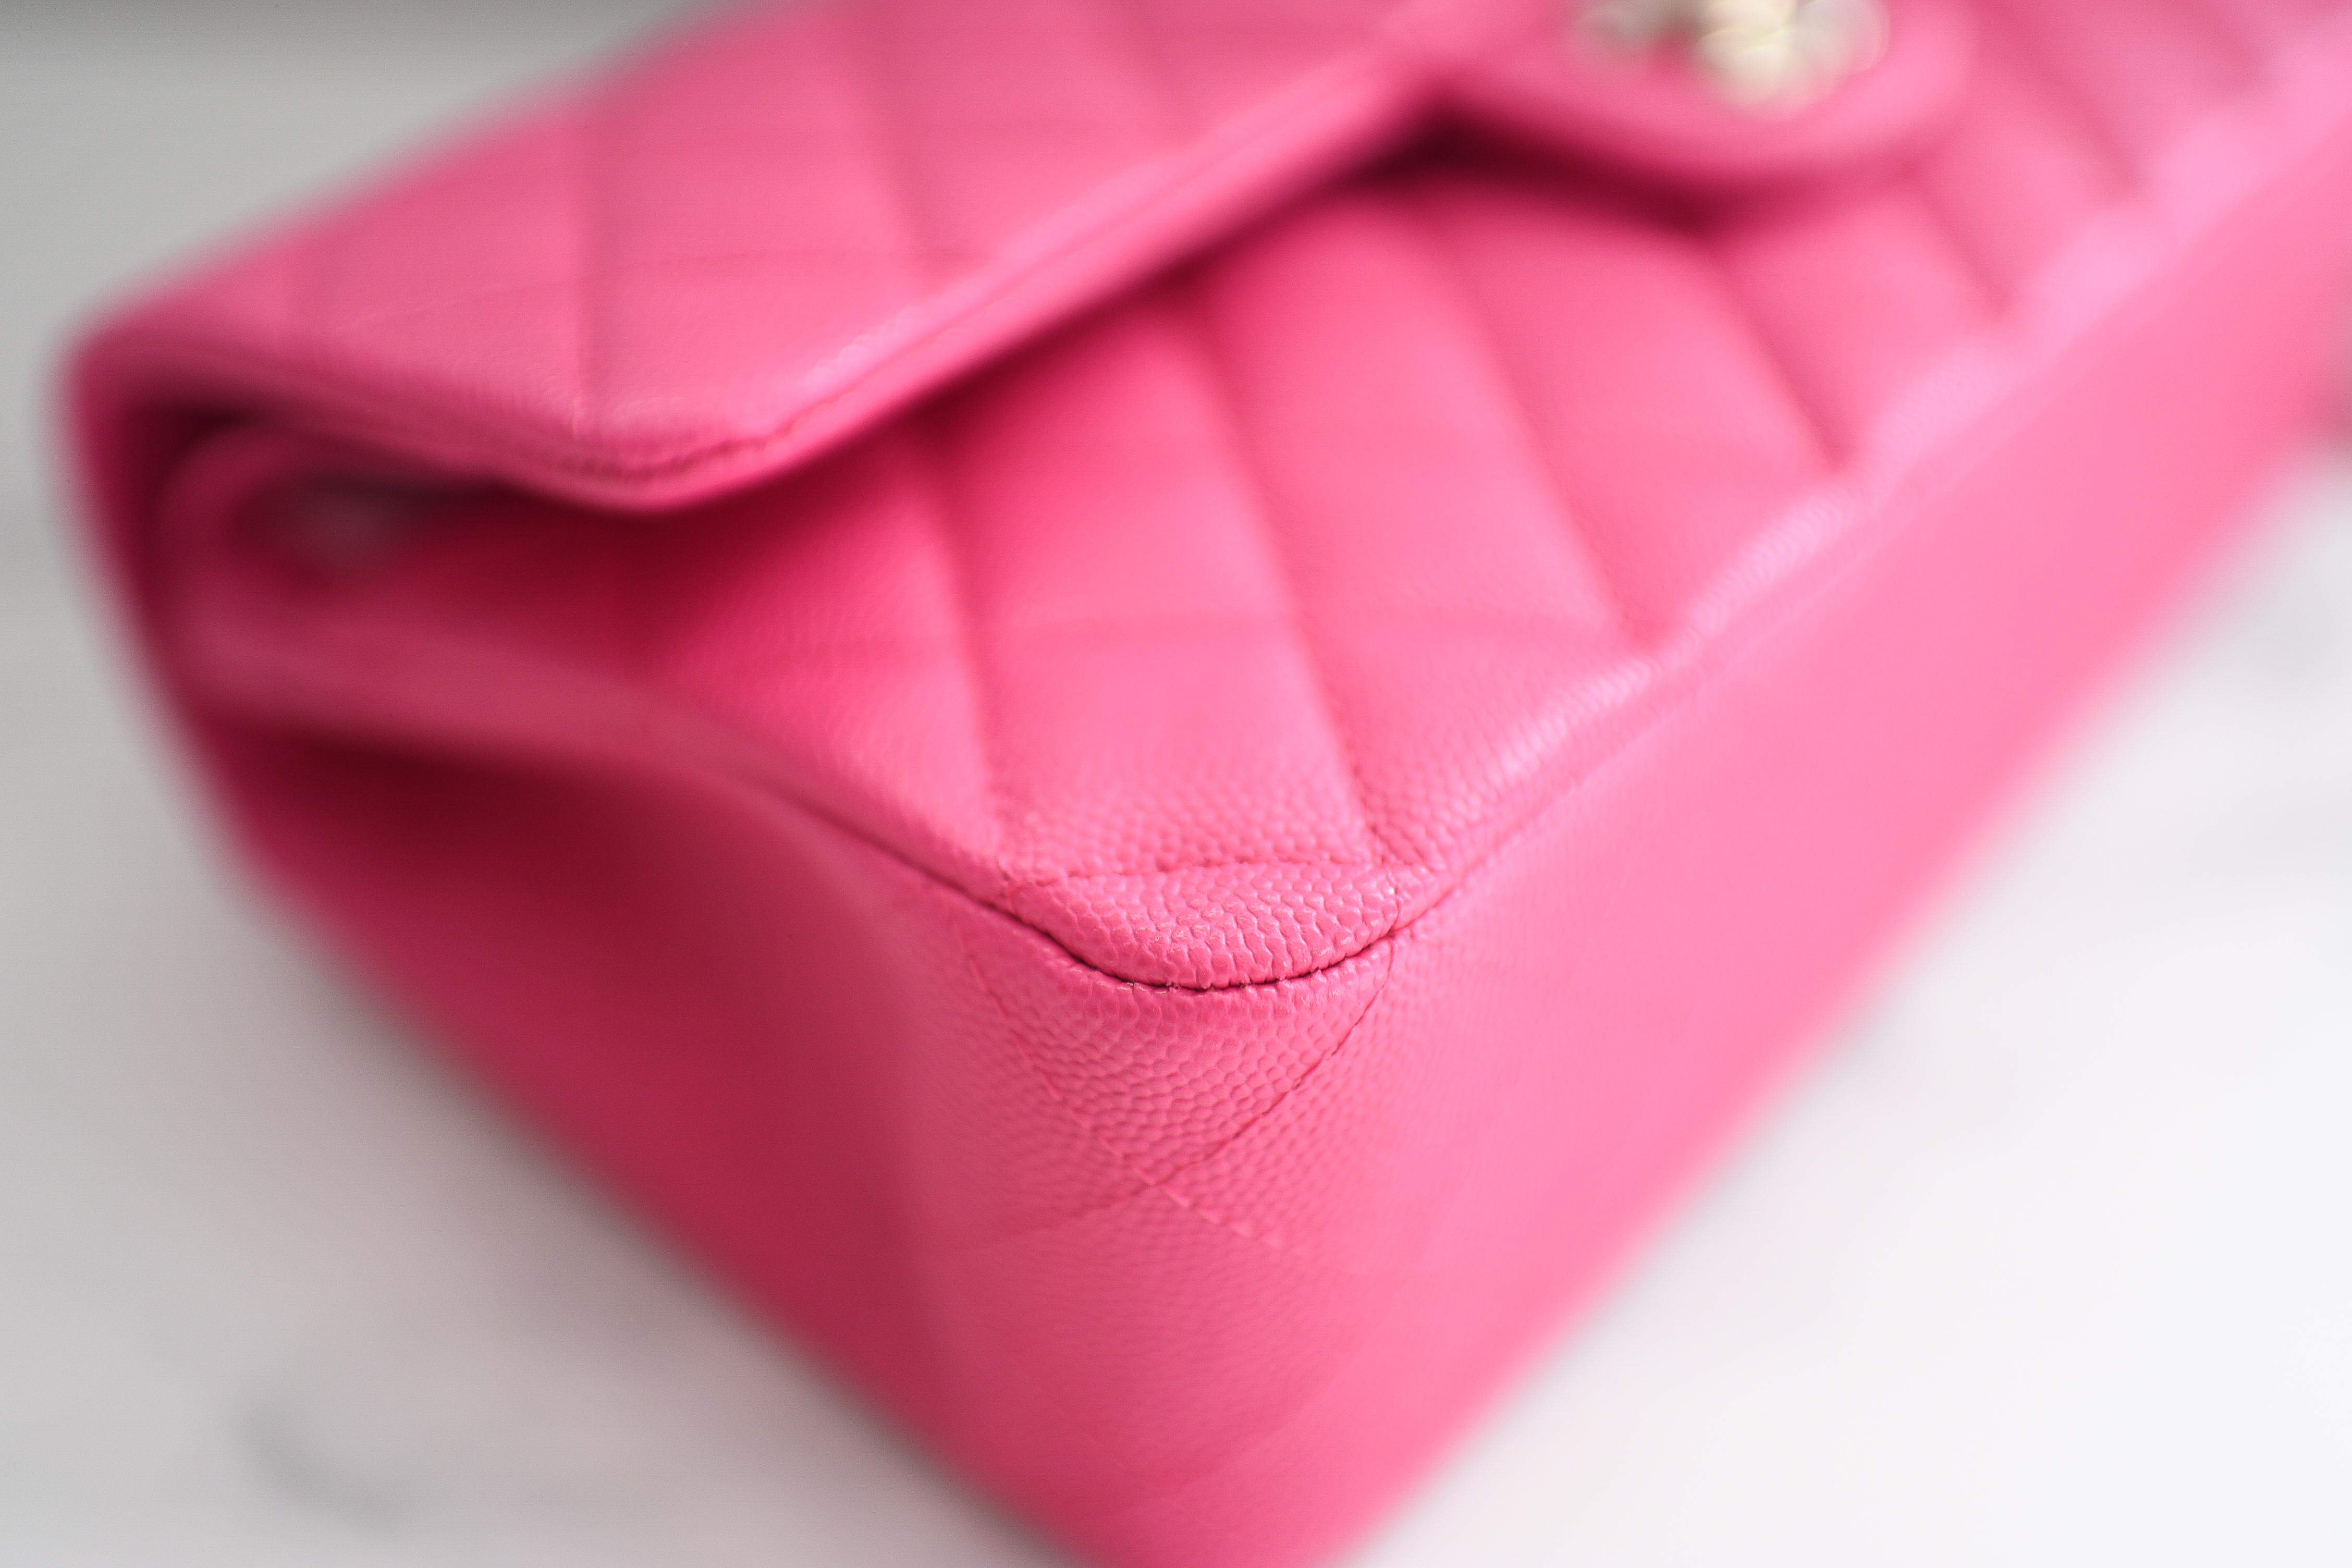 Chanel Classic Pink Bubblegum Lambskin Double Flap Bag with Gold Hardware